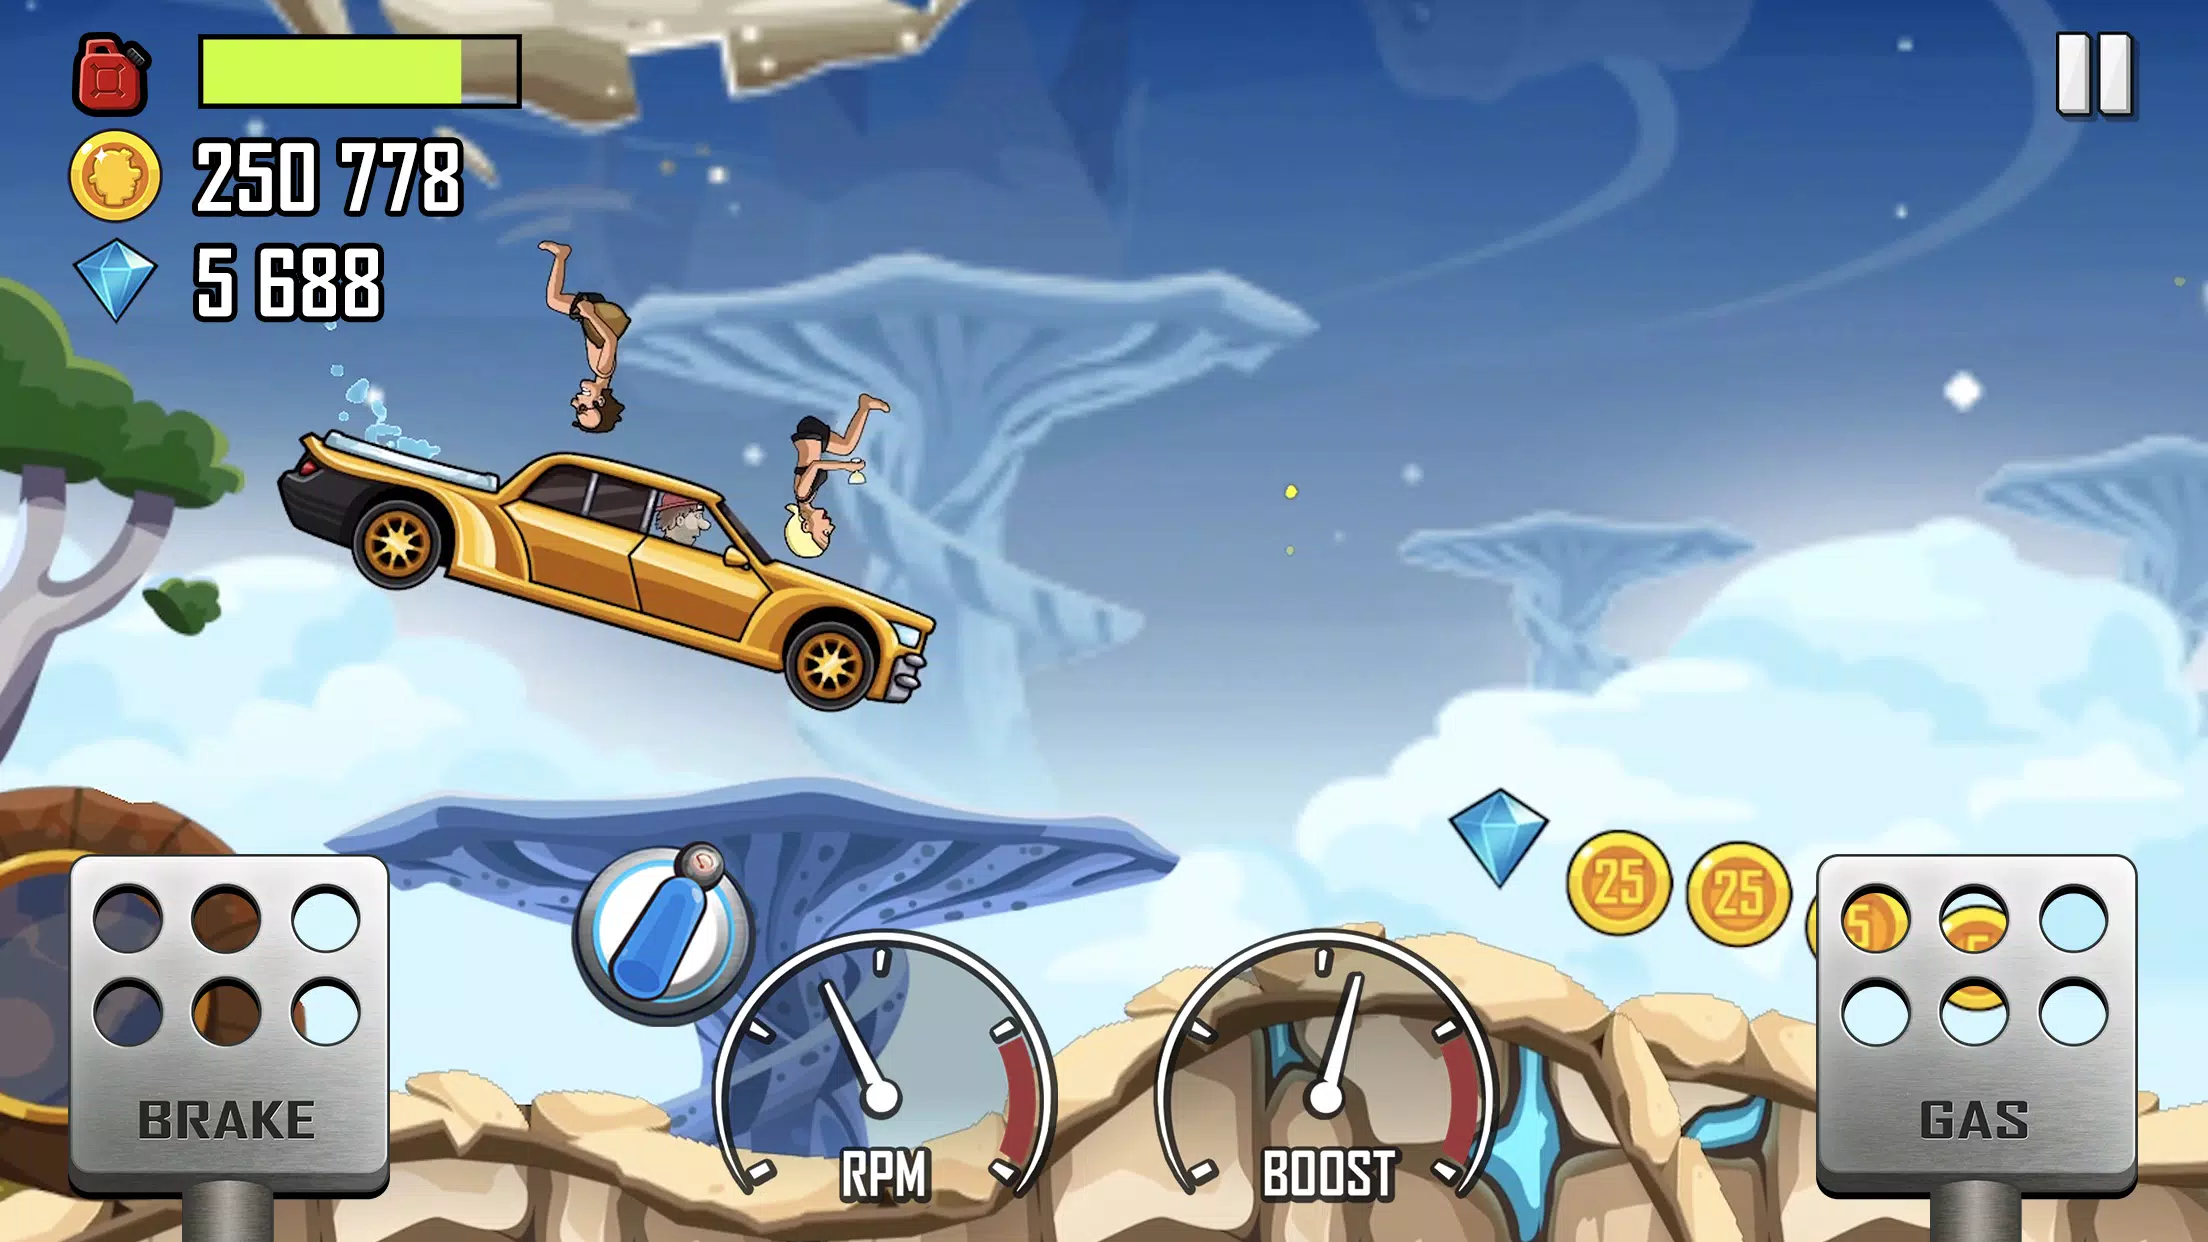 Hill Climb Racing Apk 1.60.0 Download for Android download